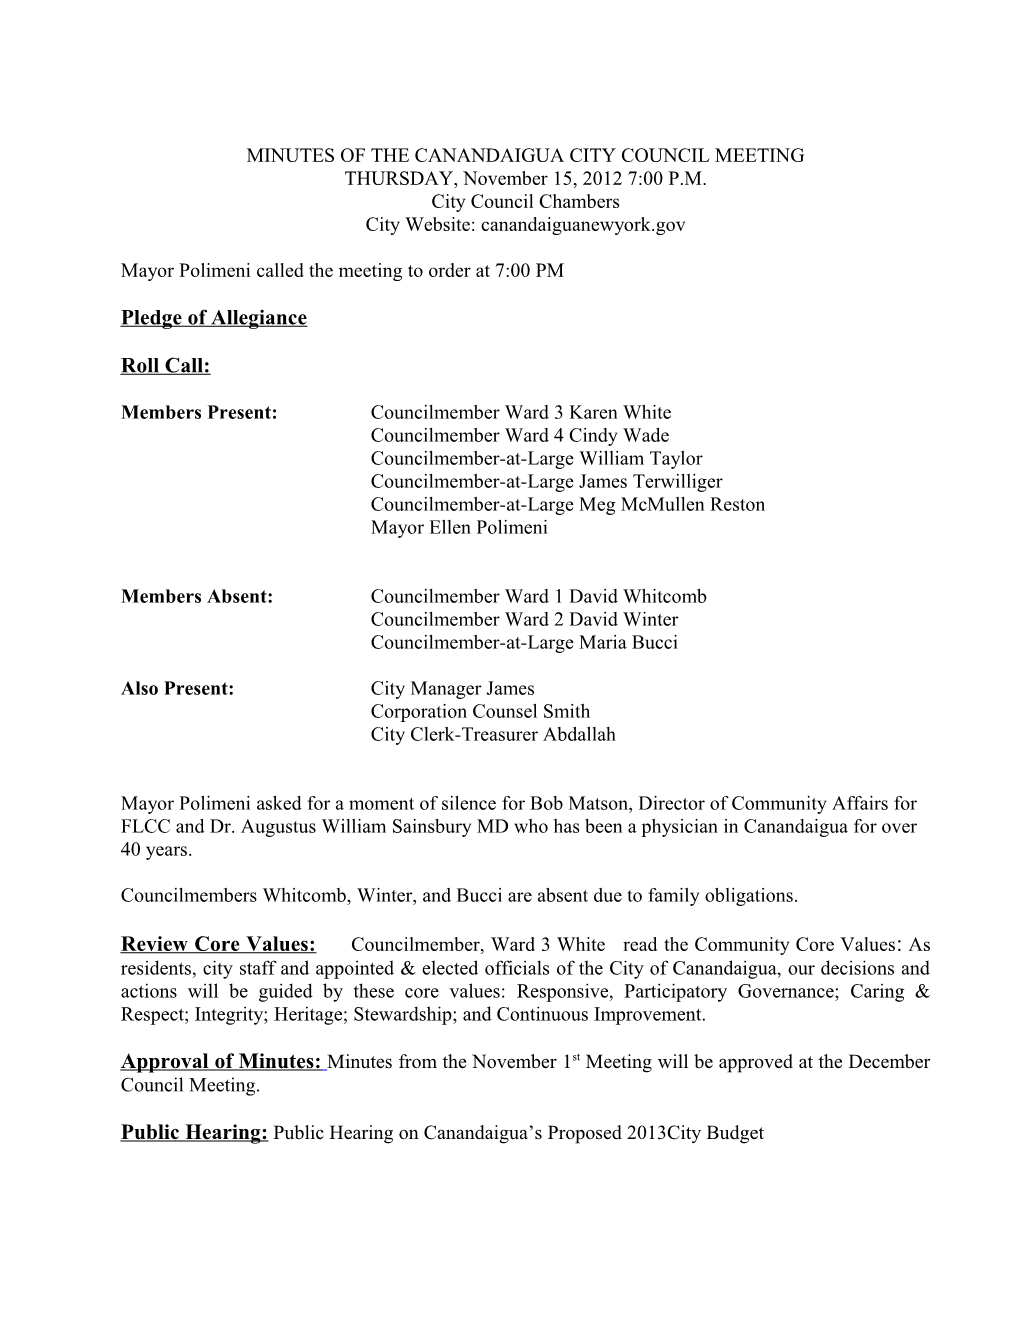 Minutes of the Canandaigua City Council Meeting